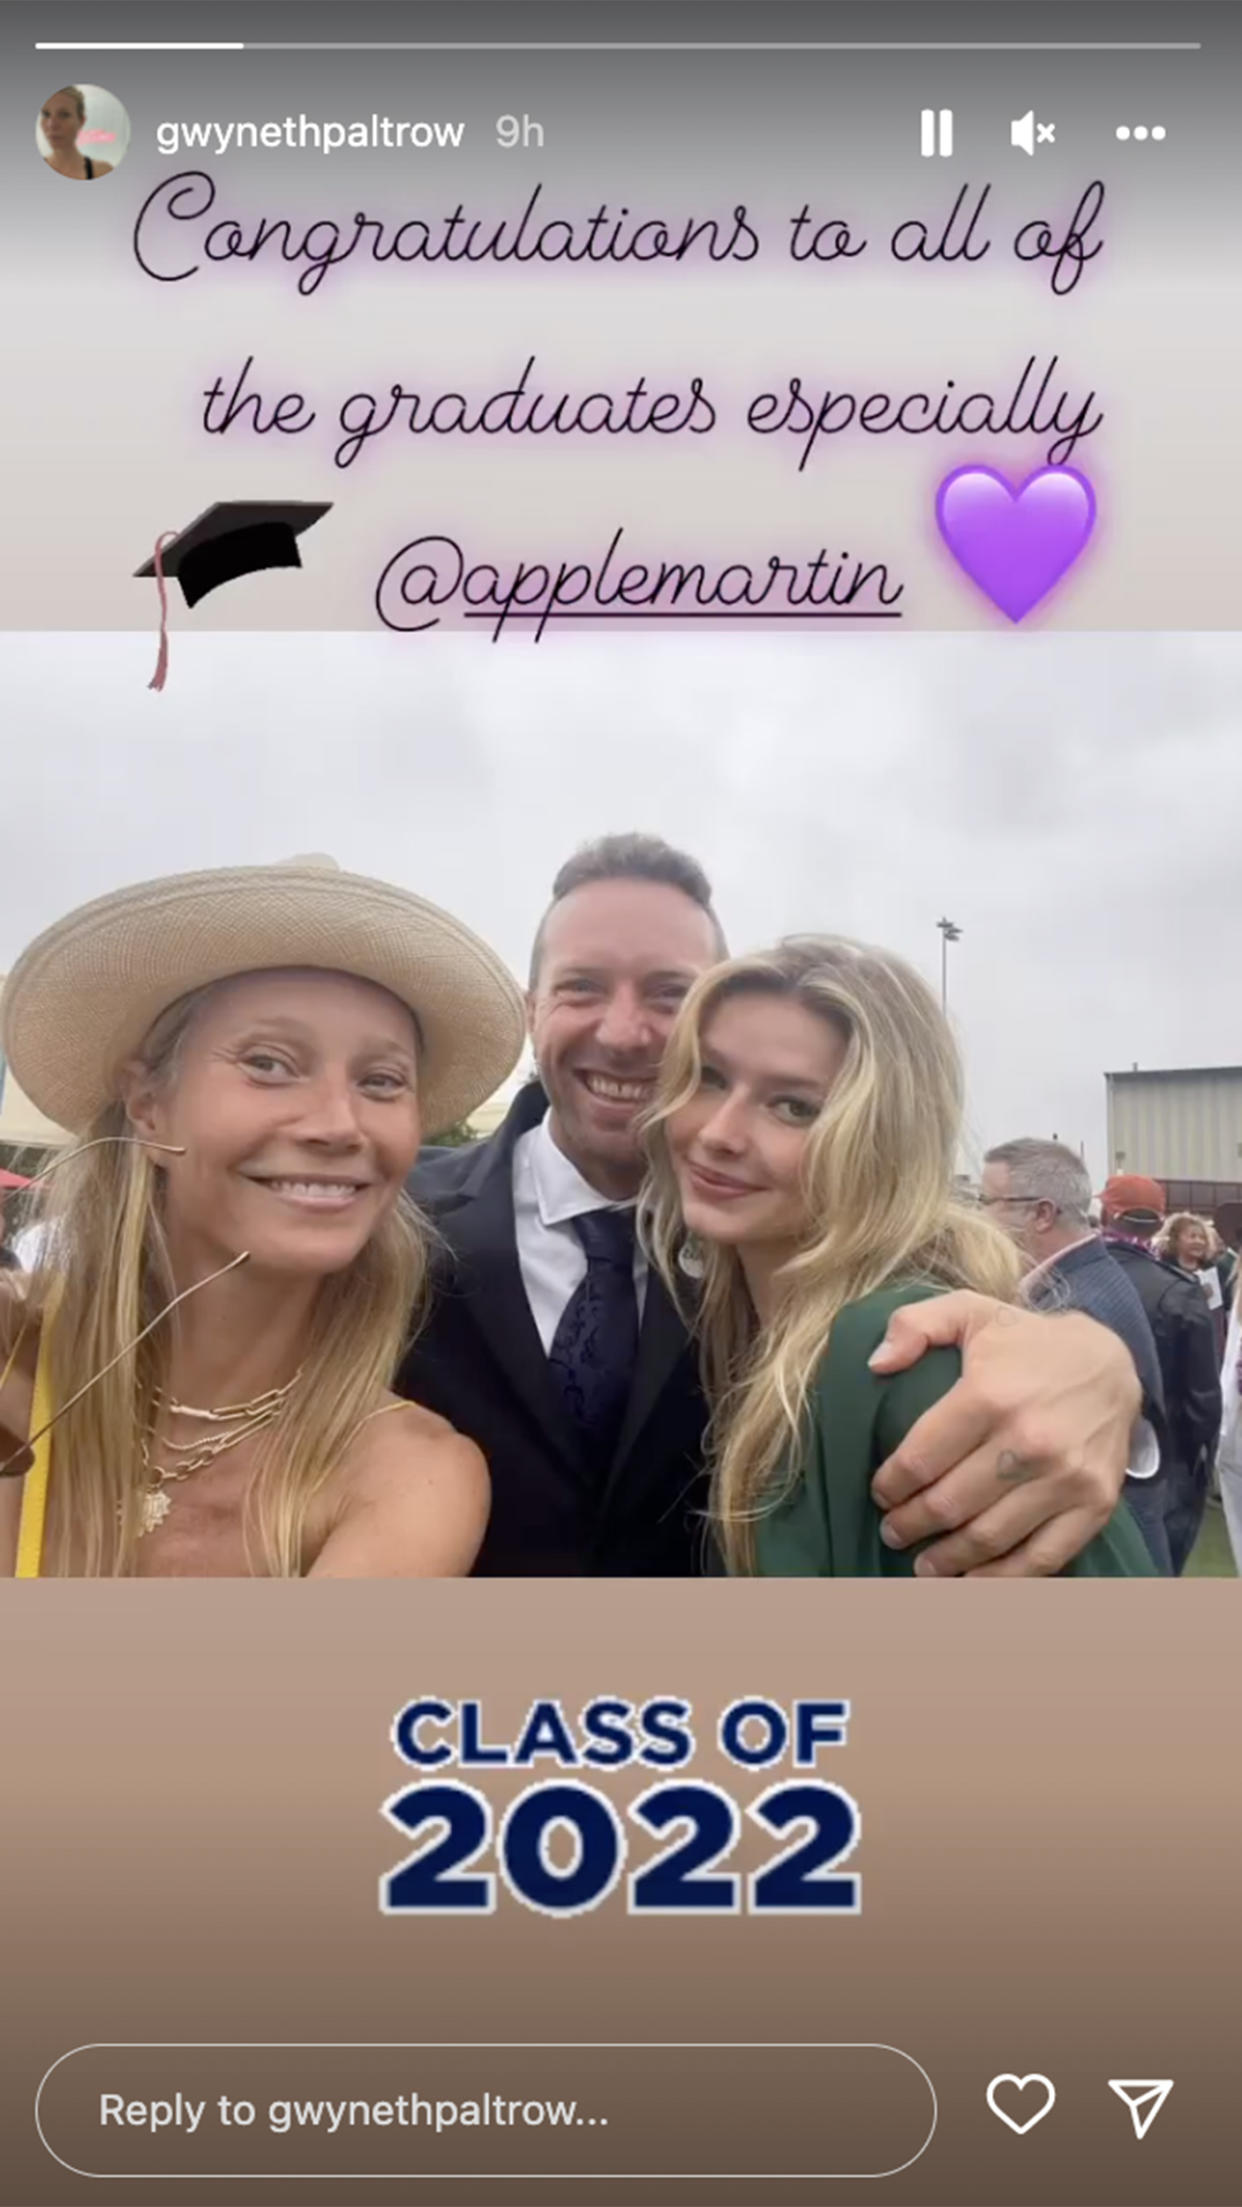 Paltrow and Martin are the proud parents of a high school graduate, daughter apple. (gwynethpaltrow/ Instagram)